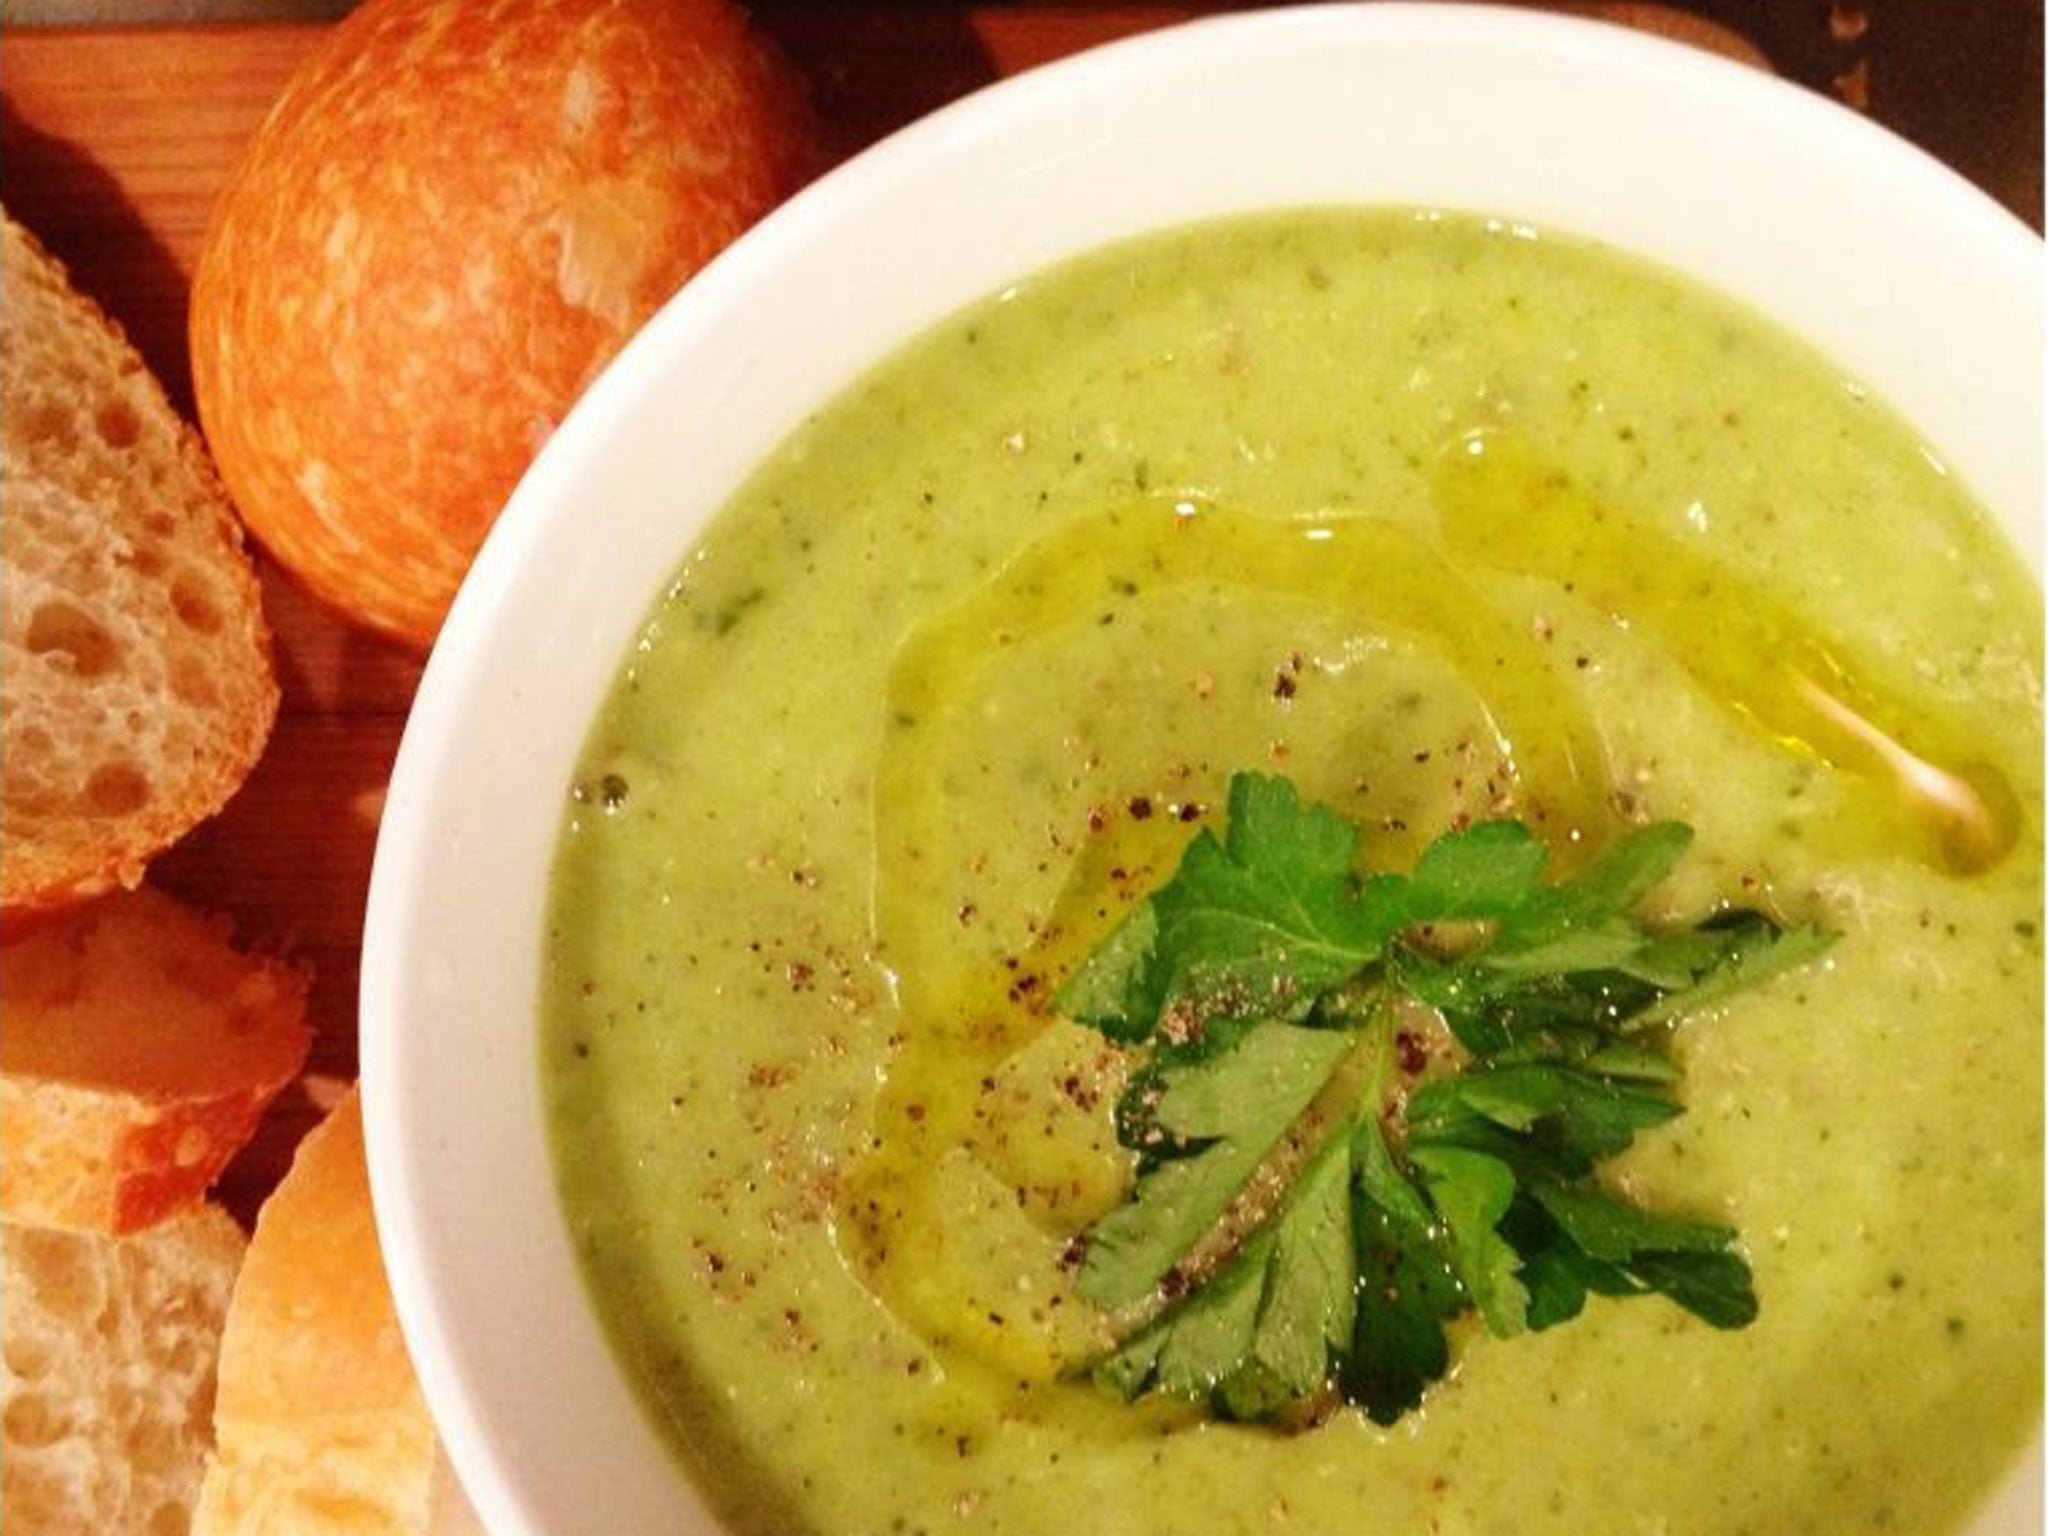 Soup is a scrumptious solution to a hungry office worker’s lunchtime woes